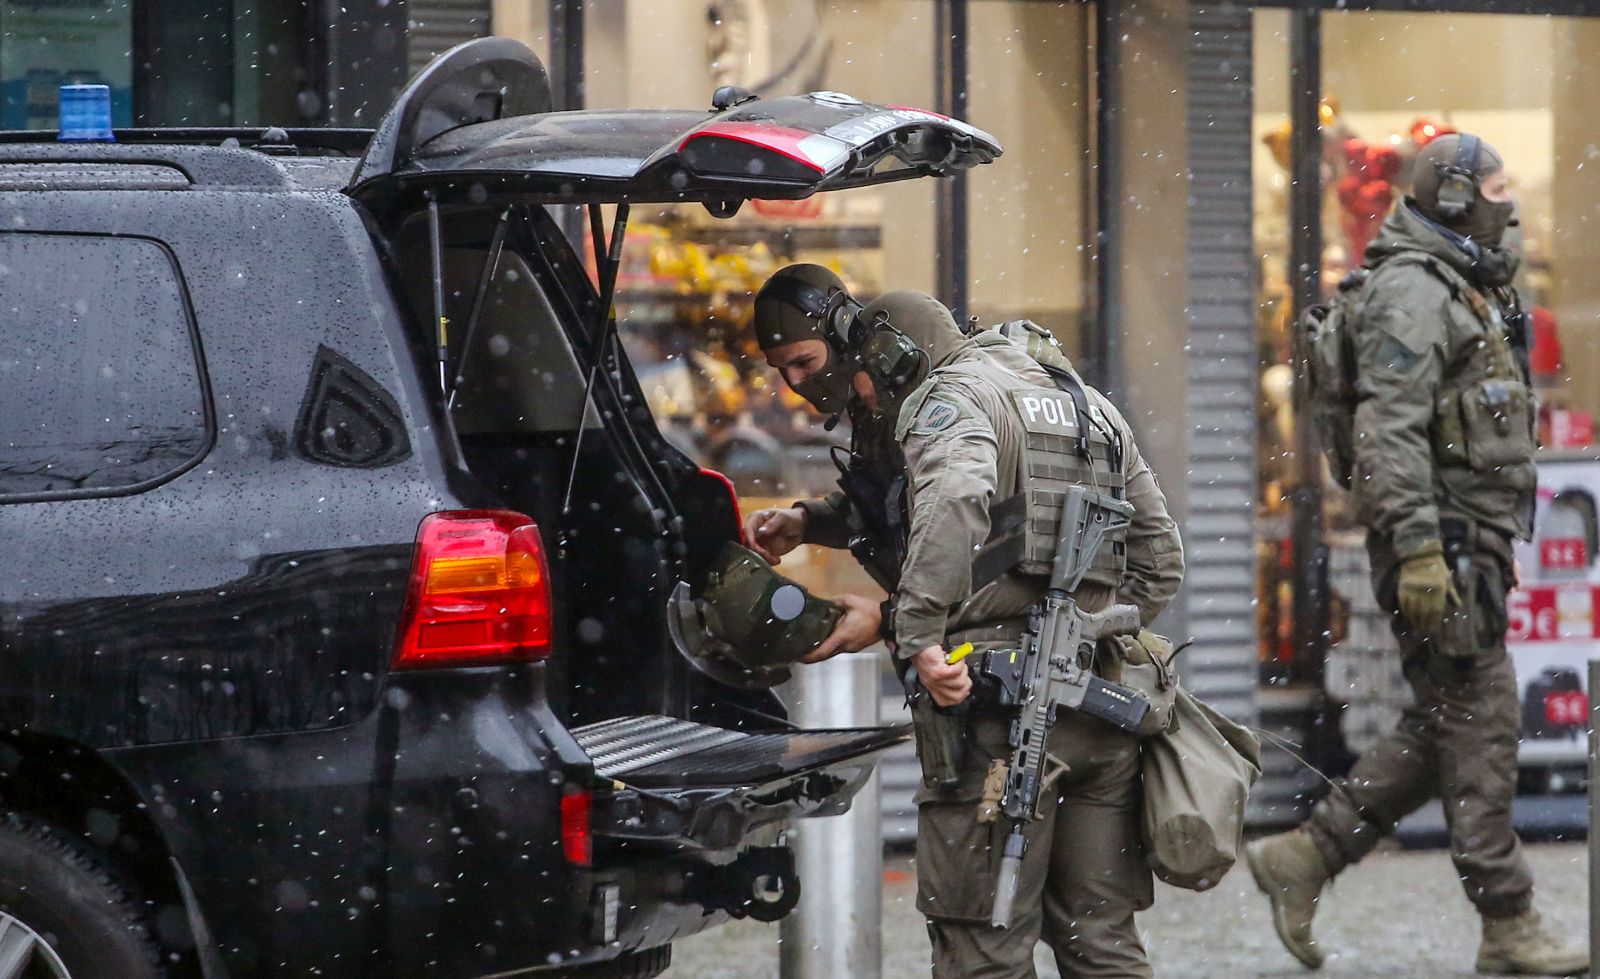 epa10359032 Armed members of a special police task force unit near a vehicle outside a shopping center in Dresden, Germany, 10 December 2022. Police announced on its social media that a hostage situation in the eastern German city of Dresden was over and that two people were released 'unharmed', after evacuating a shopping mall and its surroundings in the city center. A 40-year-old suspect died after suffering fatal injuries during the police operation to free the hostages, police added.  EPA/MATTHIAS SCHUMANN